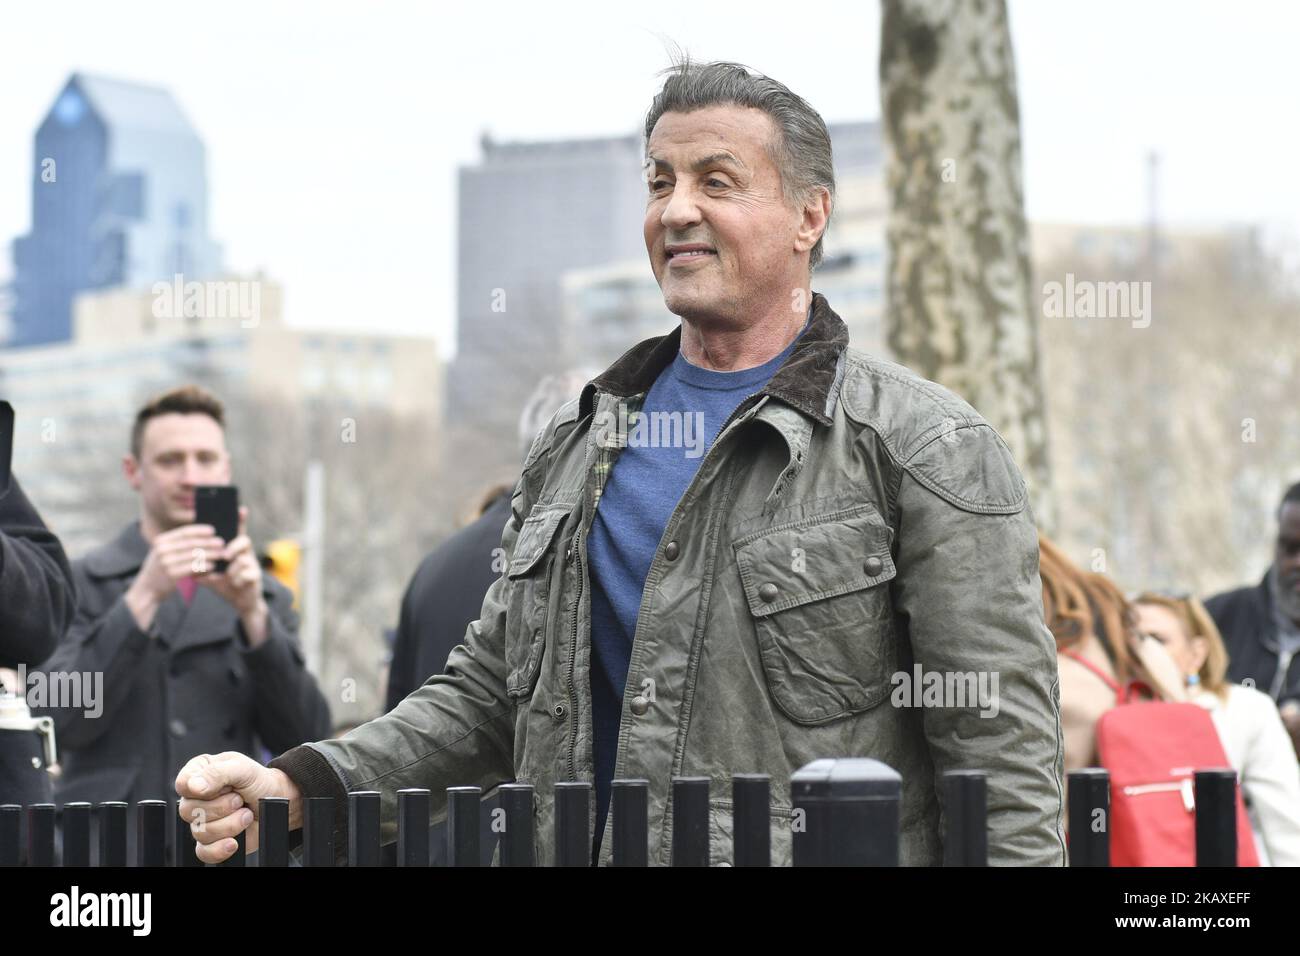 Actor, director Sylvester Stallone visits the Rocky statue at the Philadelphia Museum of Art, in Philadelphia, PA on April 6, 2018. The legendary Rocky Balboa actor returns to the city for the start of the filming of Creed II. (Photo by Bastiaan Slabbers/NurPhoto) Stock Photo